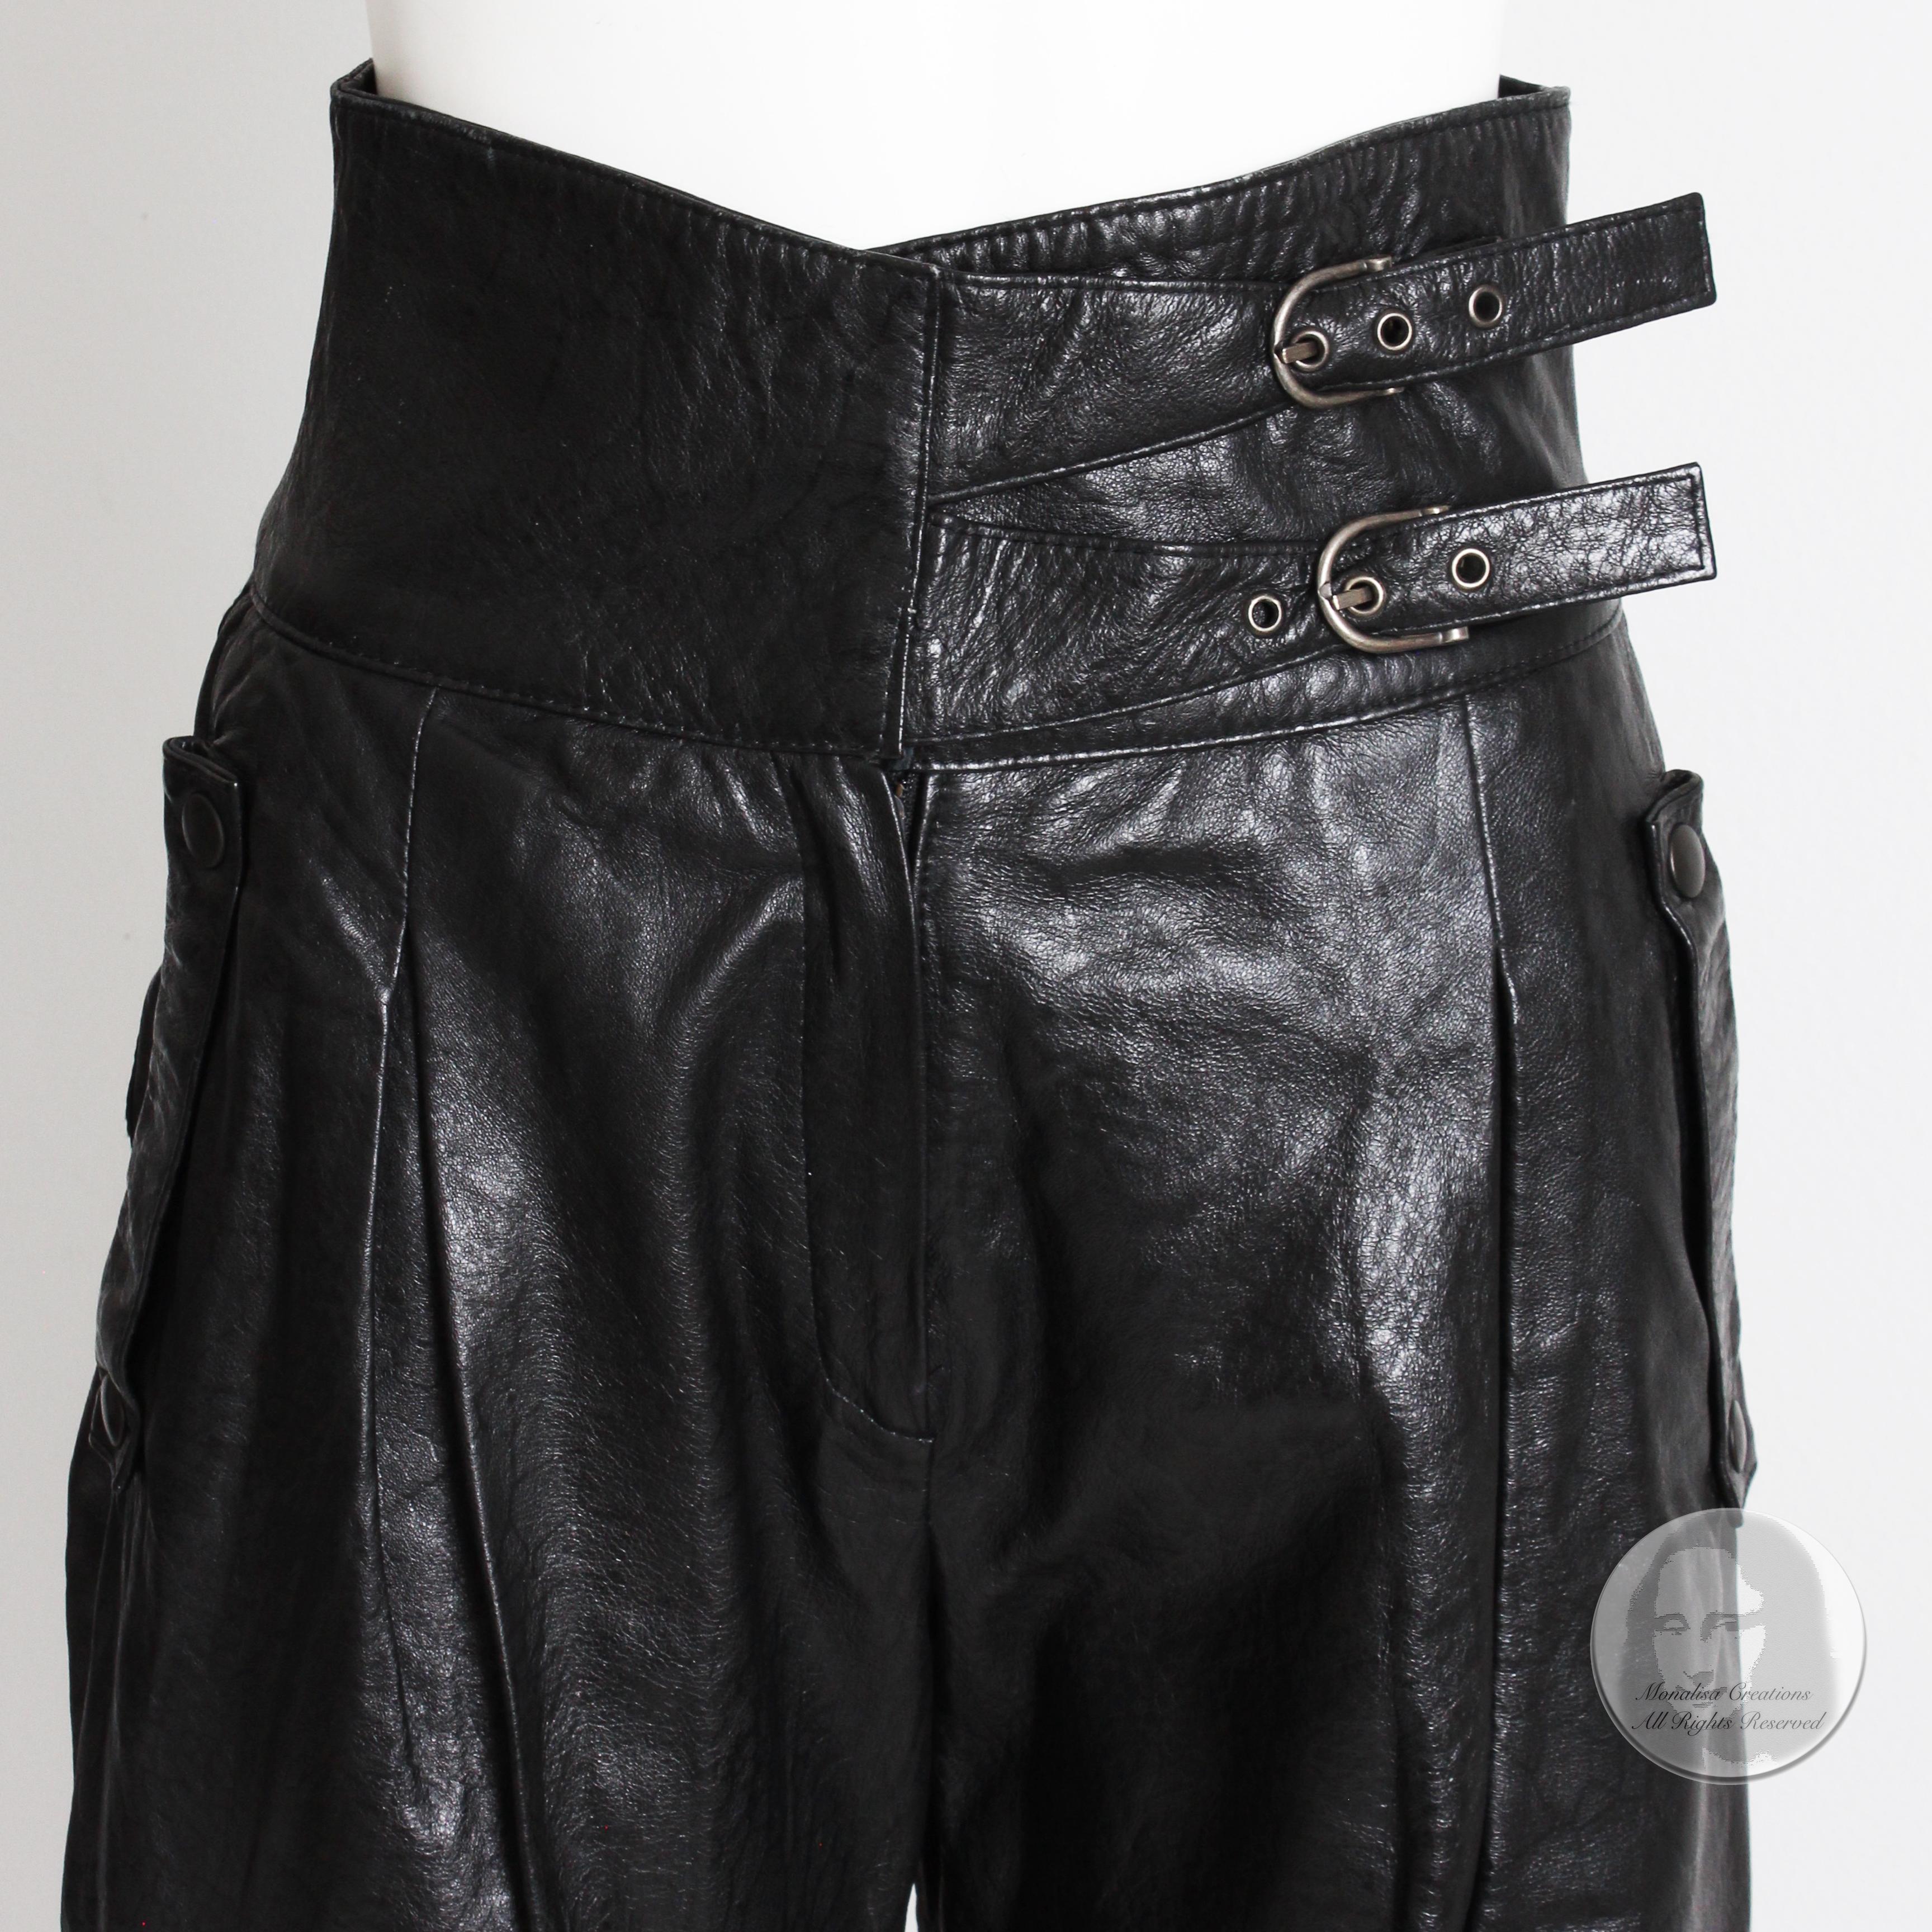 Beged-Or Leather Pants Made in Israel Black Vintage 80s Sz 40 NWT New Old Stock 5